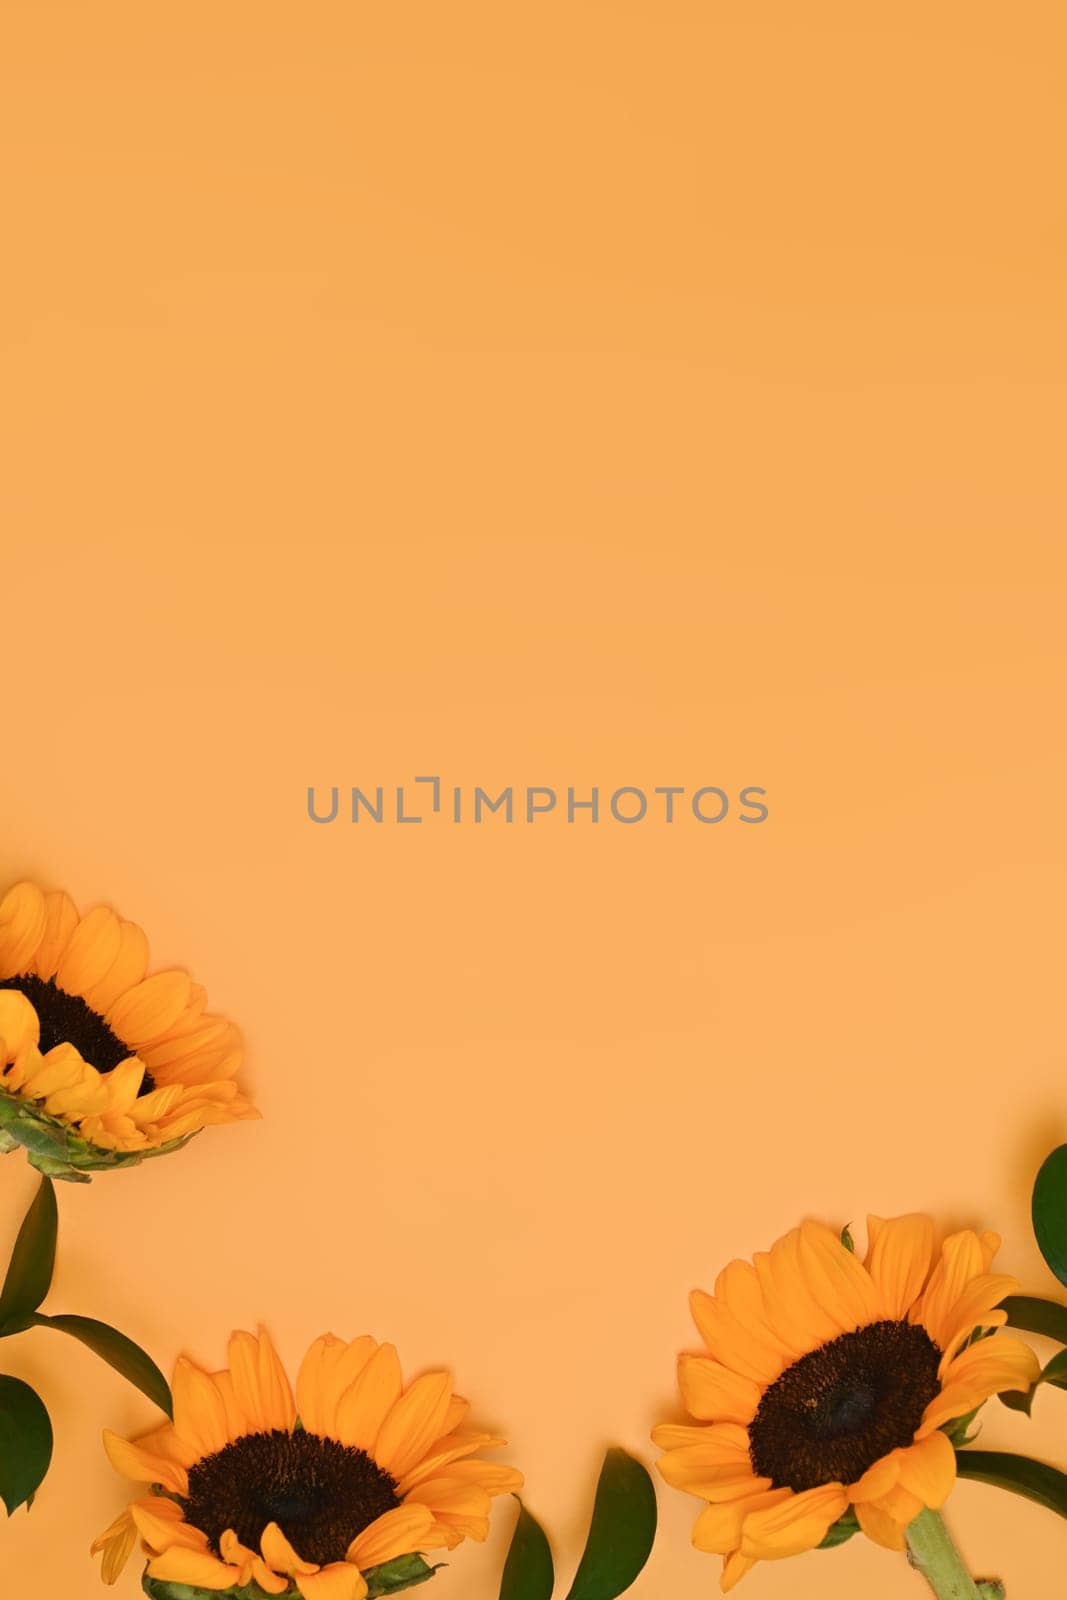 Sunflowers with green leaves on yellow background with copy space. Natural background, autumn or summer concept.